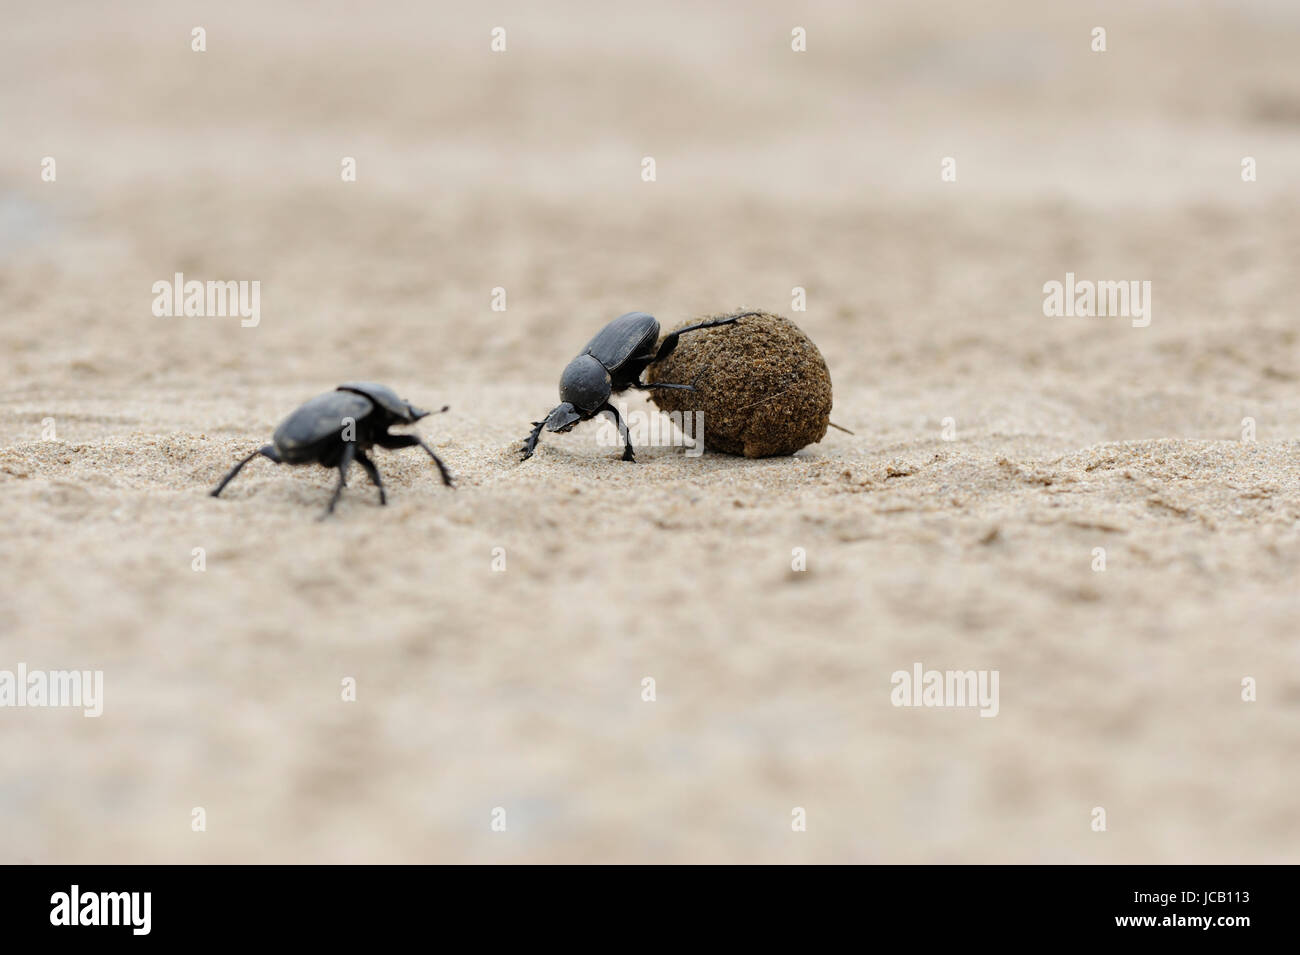 A group of dung beetle rolling dung Stock Photo